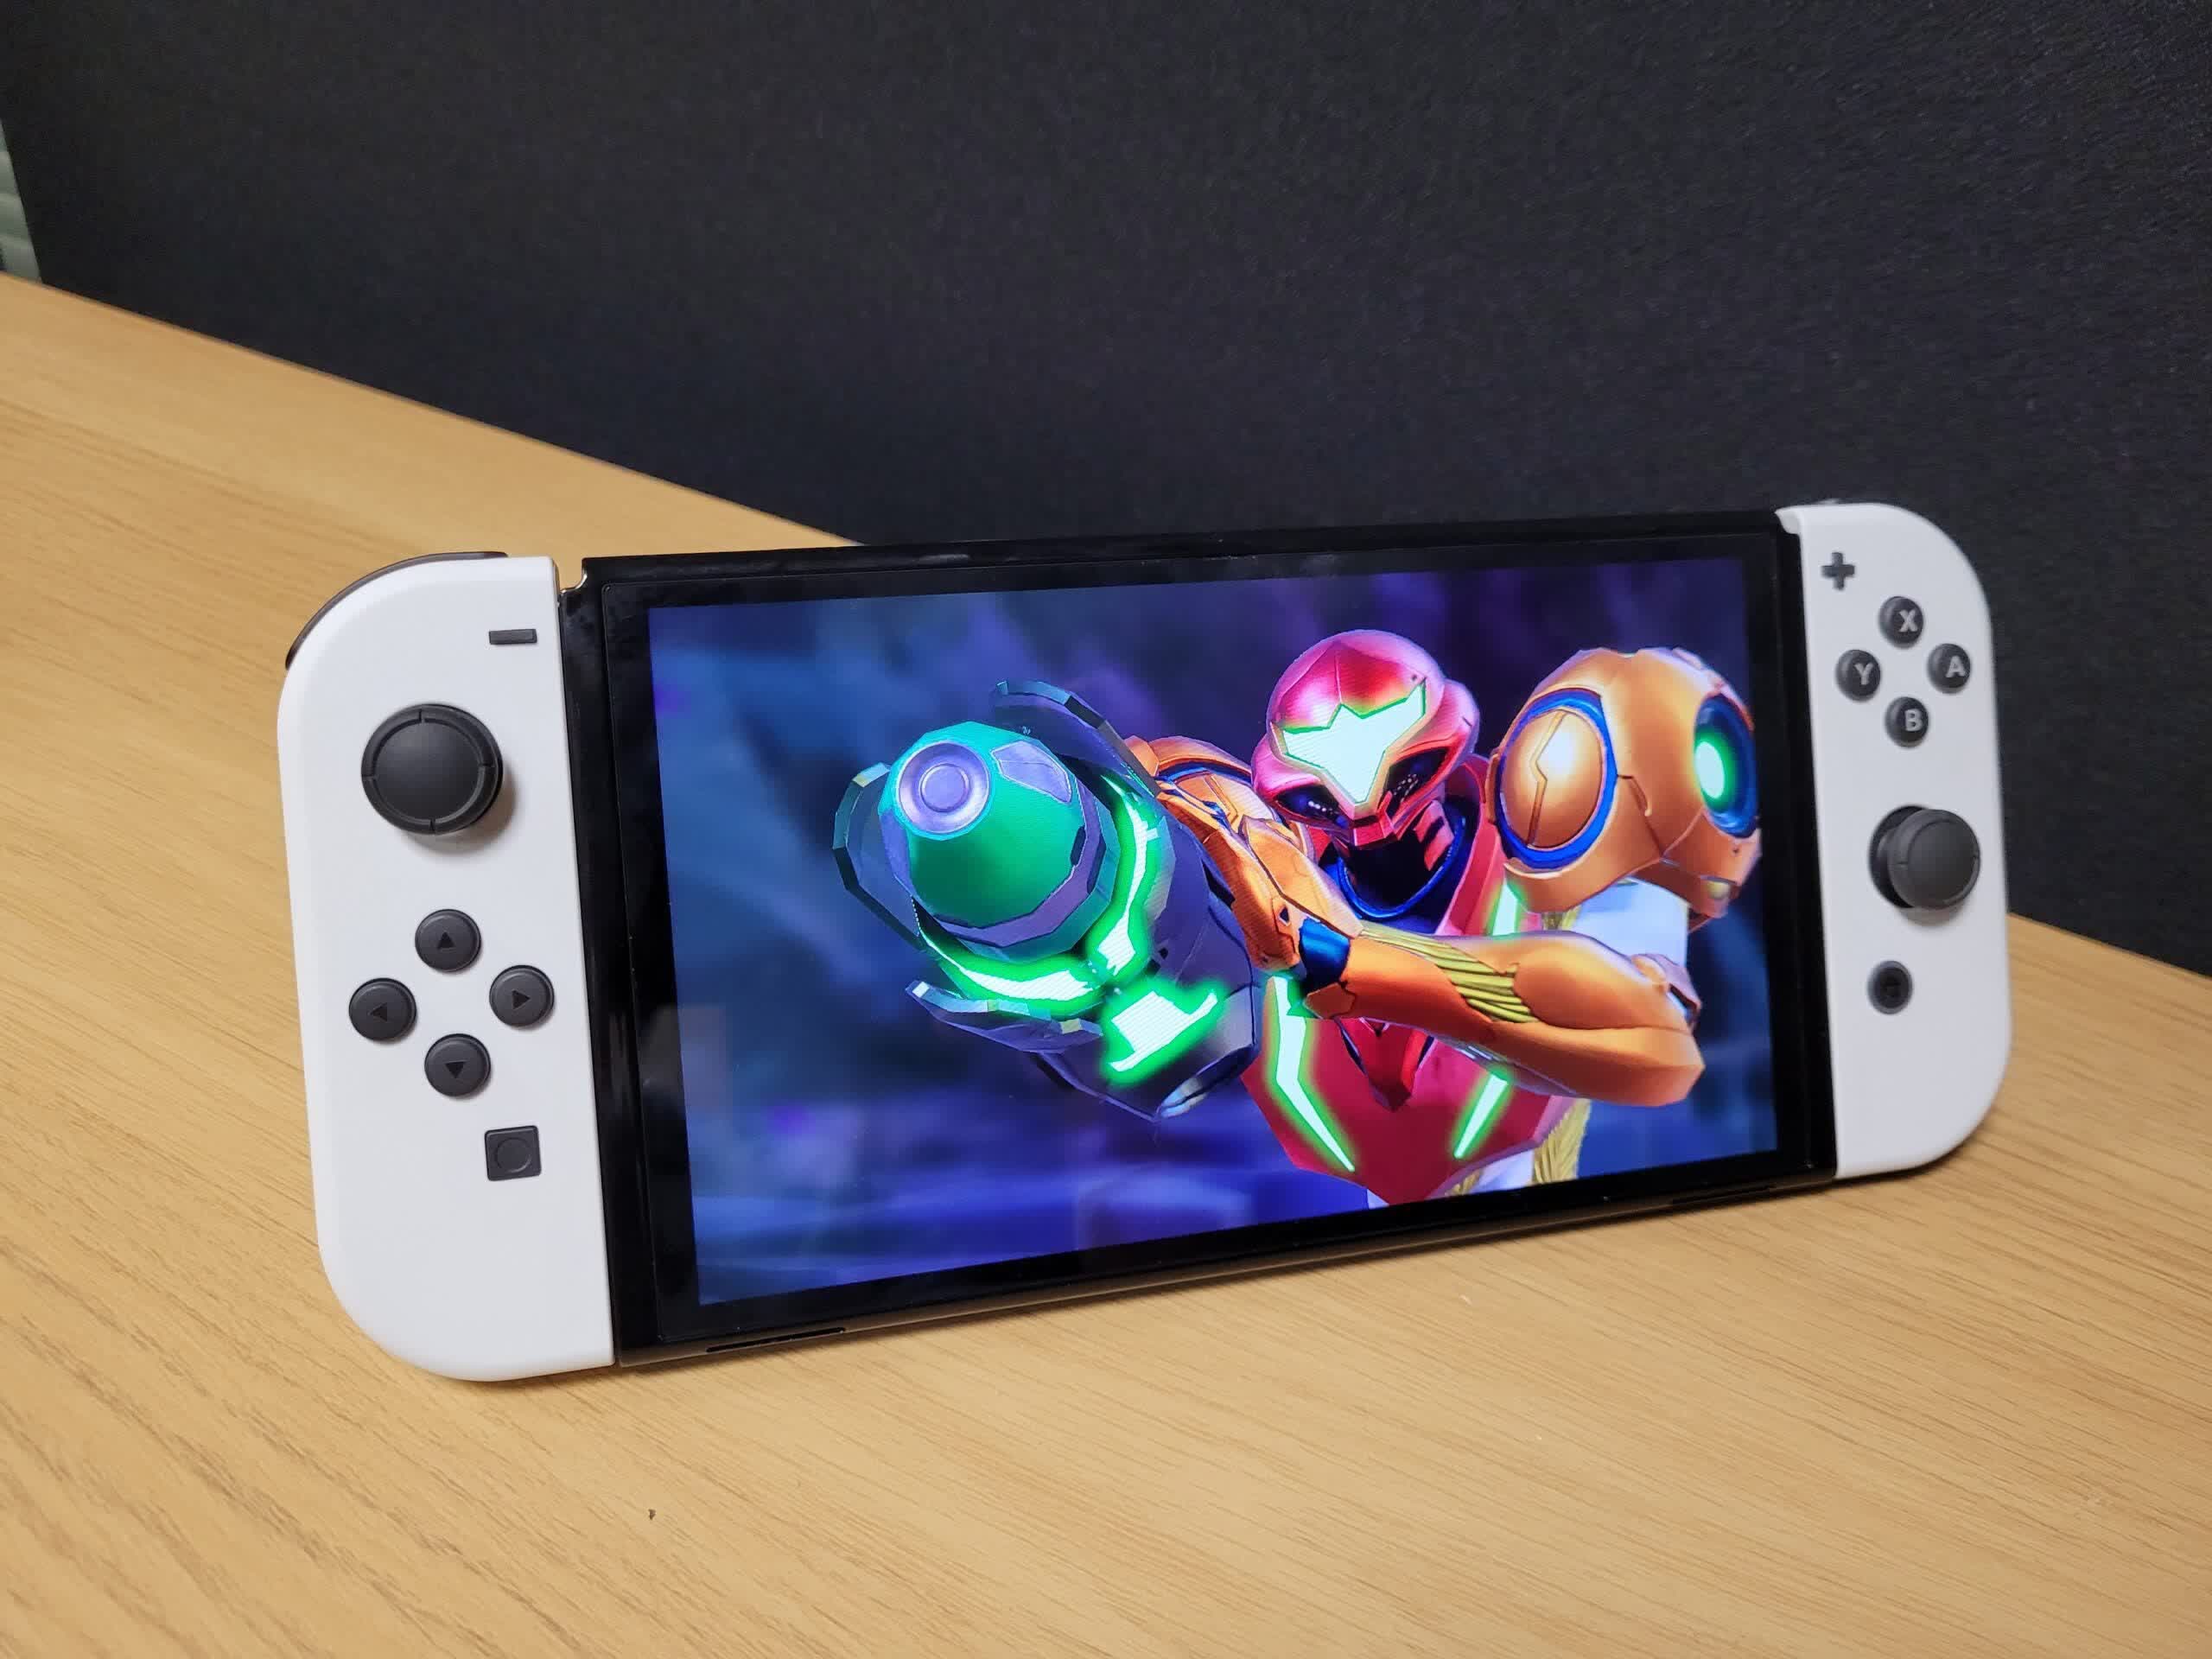 Nintendo Switch OLED dock features chipset capable of 4K60 output even though the handheld can't use it